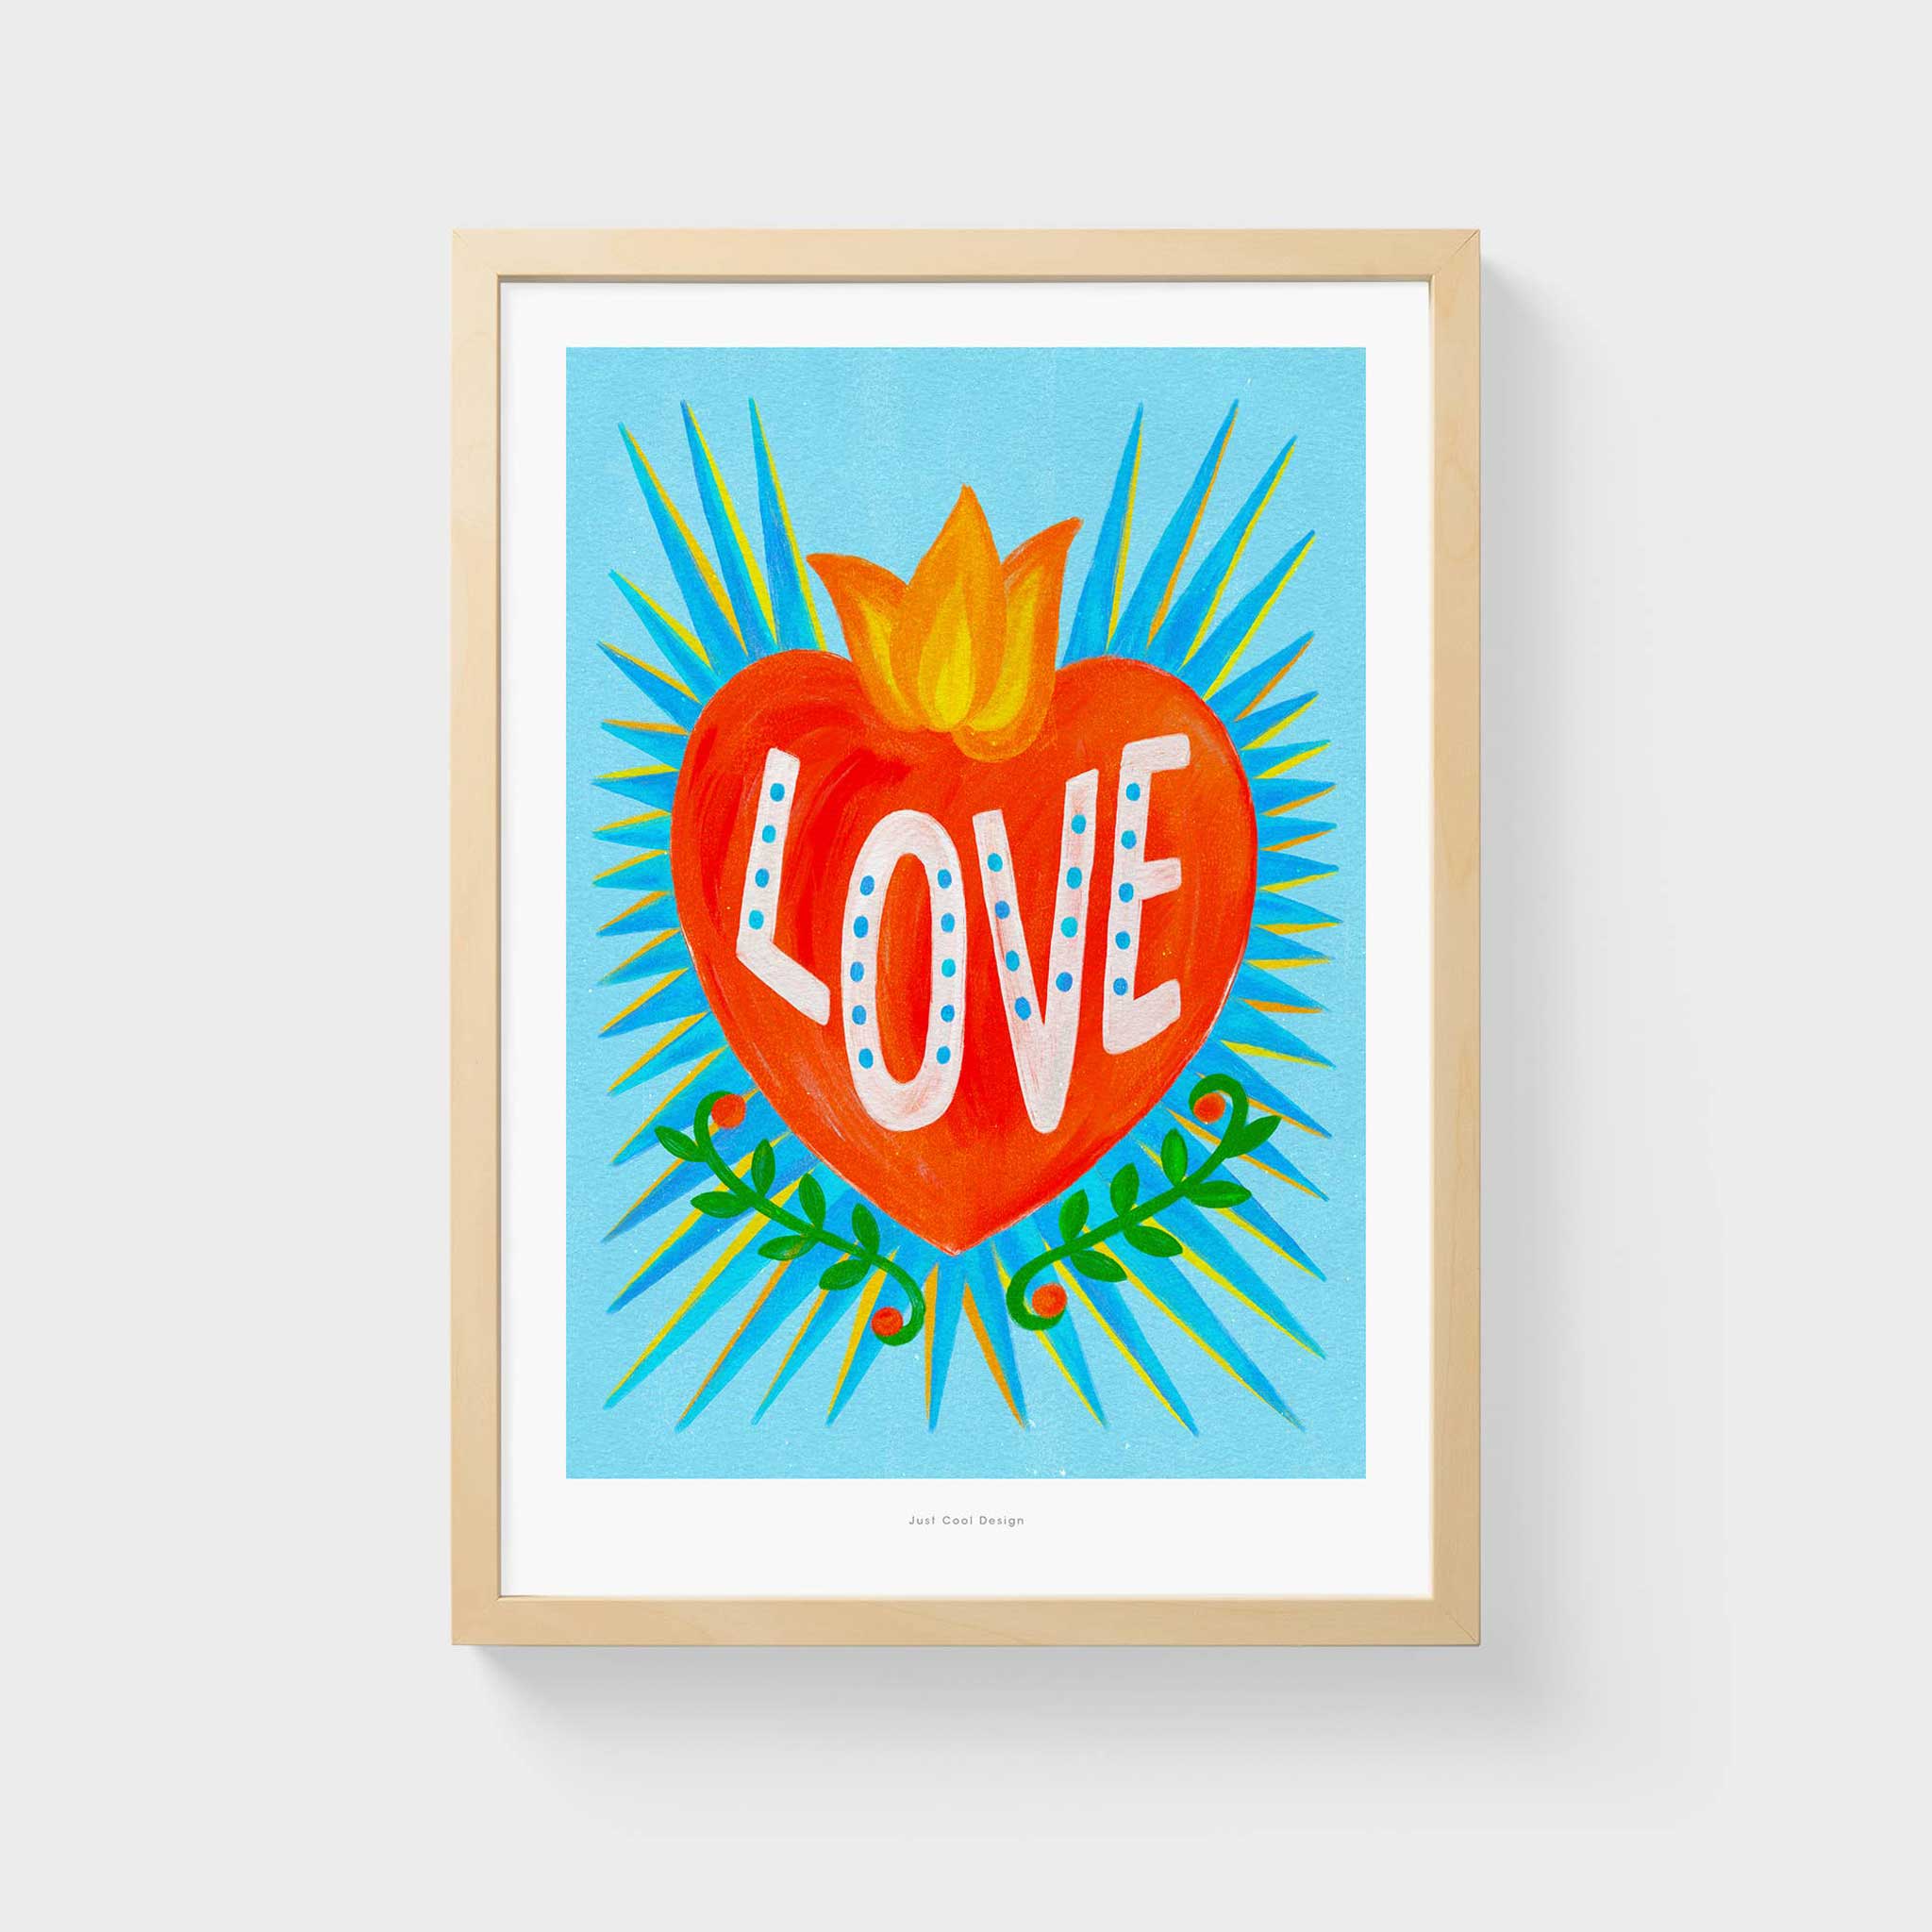 MEXICAN LOVE HEART | Graphic POSTER | A4 Format | Just Another Cool Design